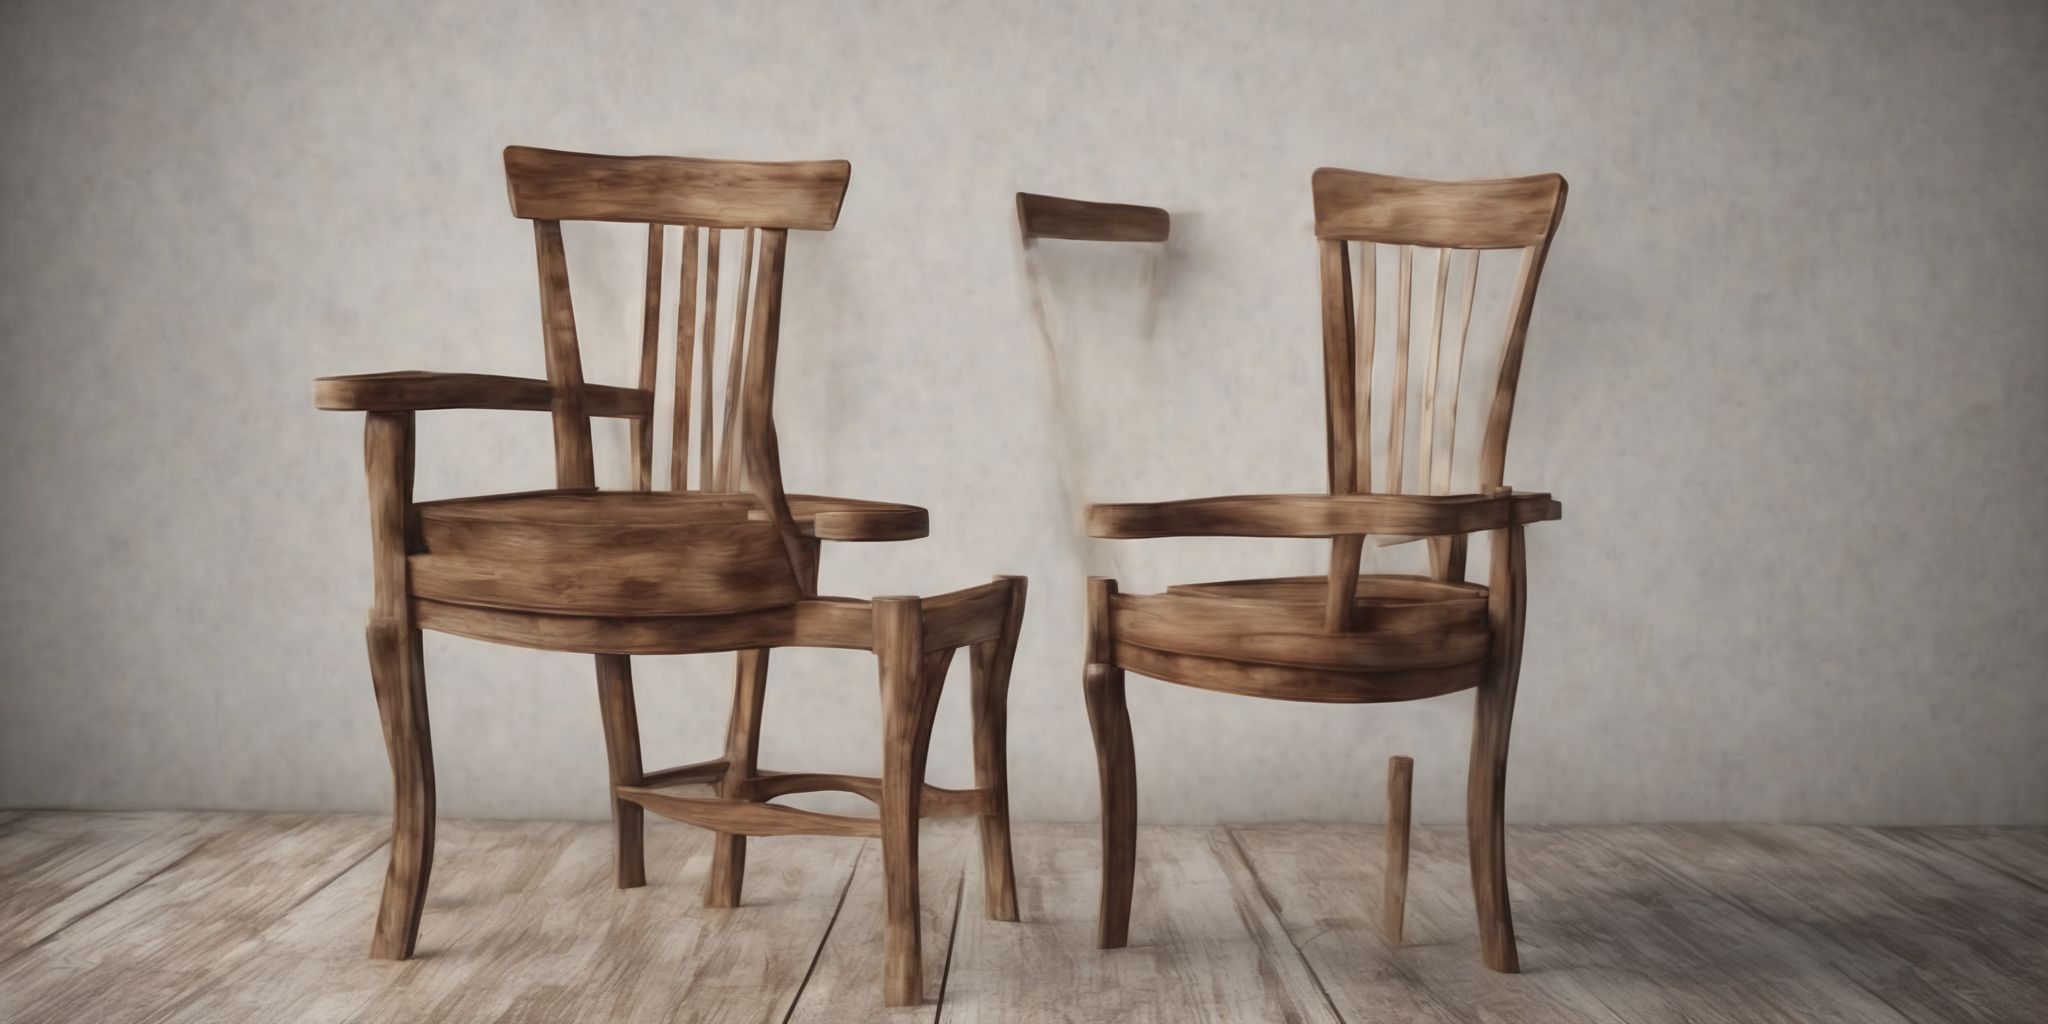 Chair  in realistic, photographic style